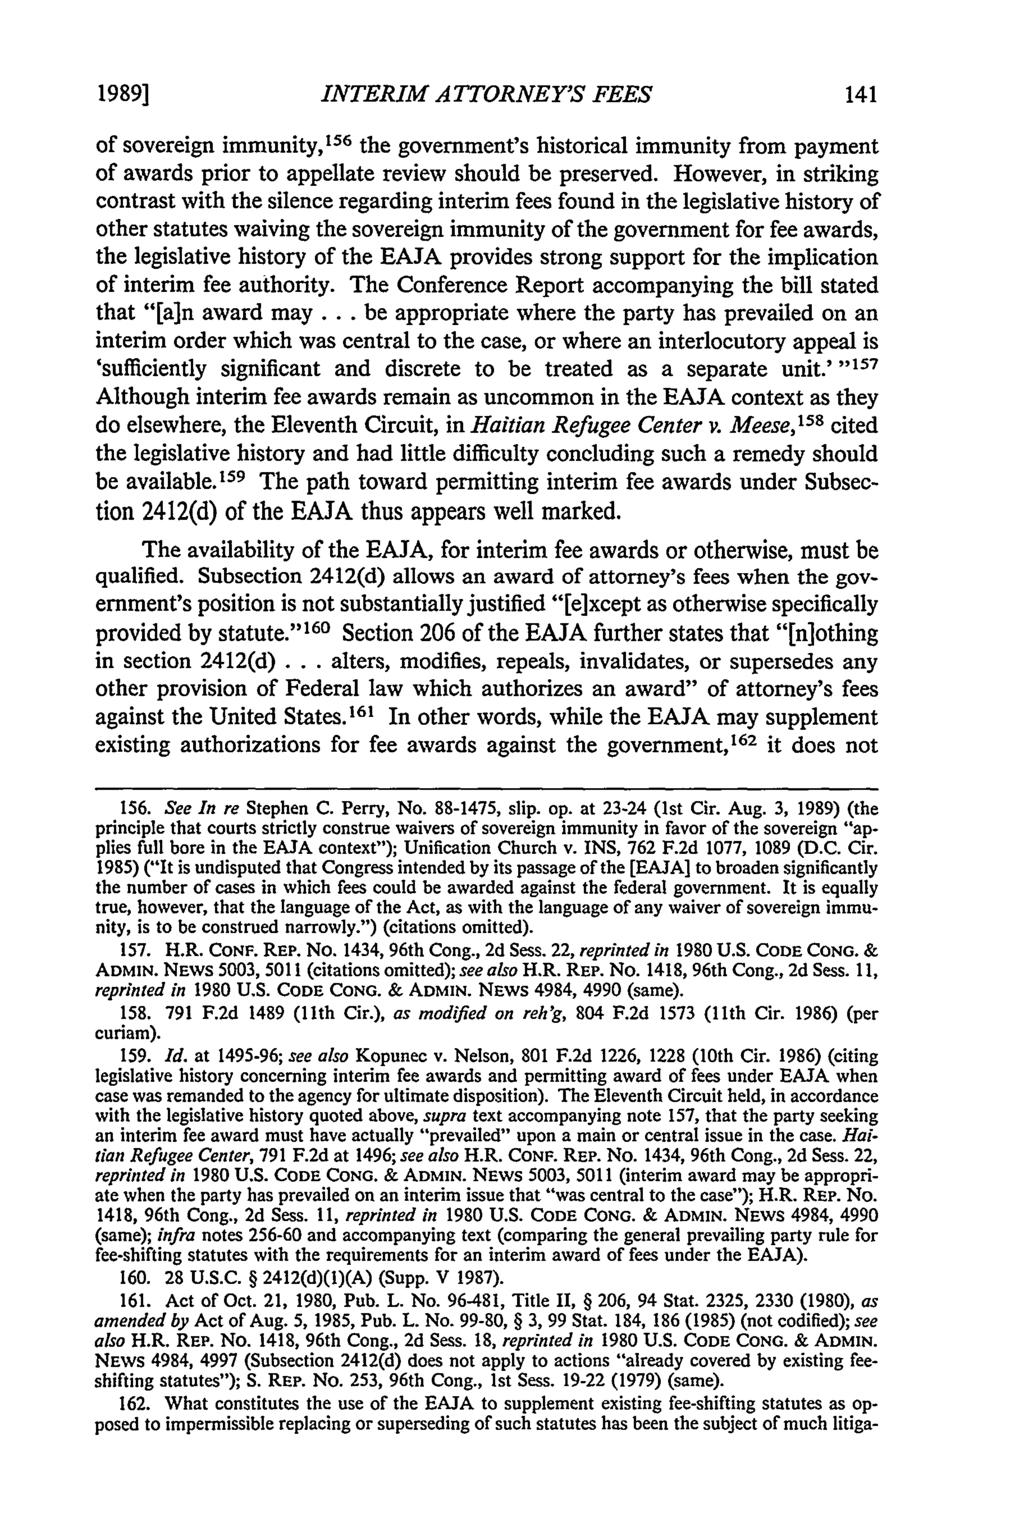 1989] INTERIM ATTORNEY'S FEES of sovereign immunity,1 5 6 the government's historical immunity from payment of awards prior to appellate review should be preserved.